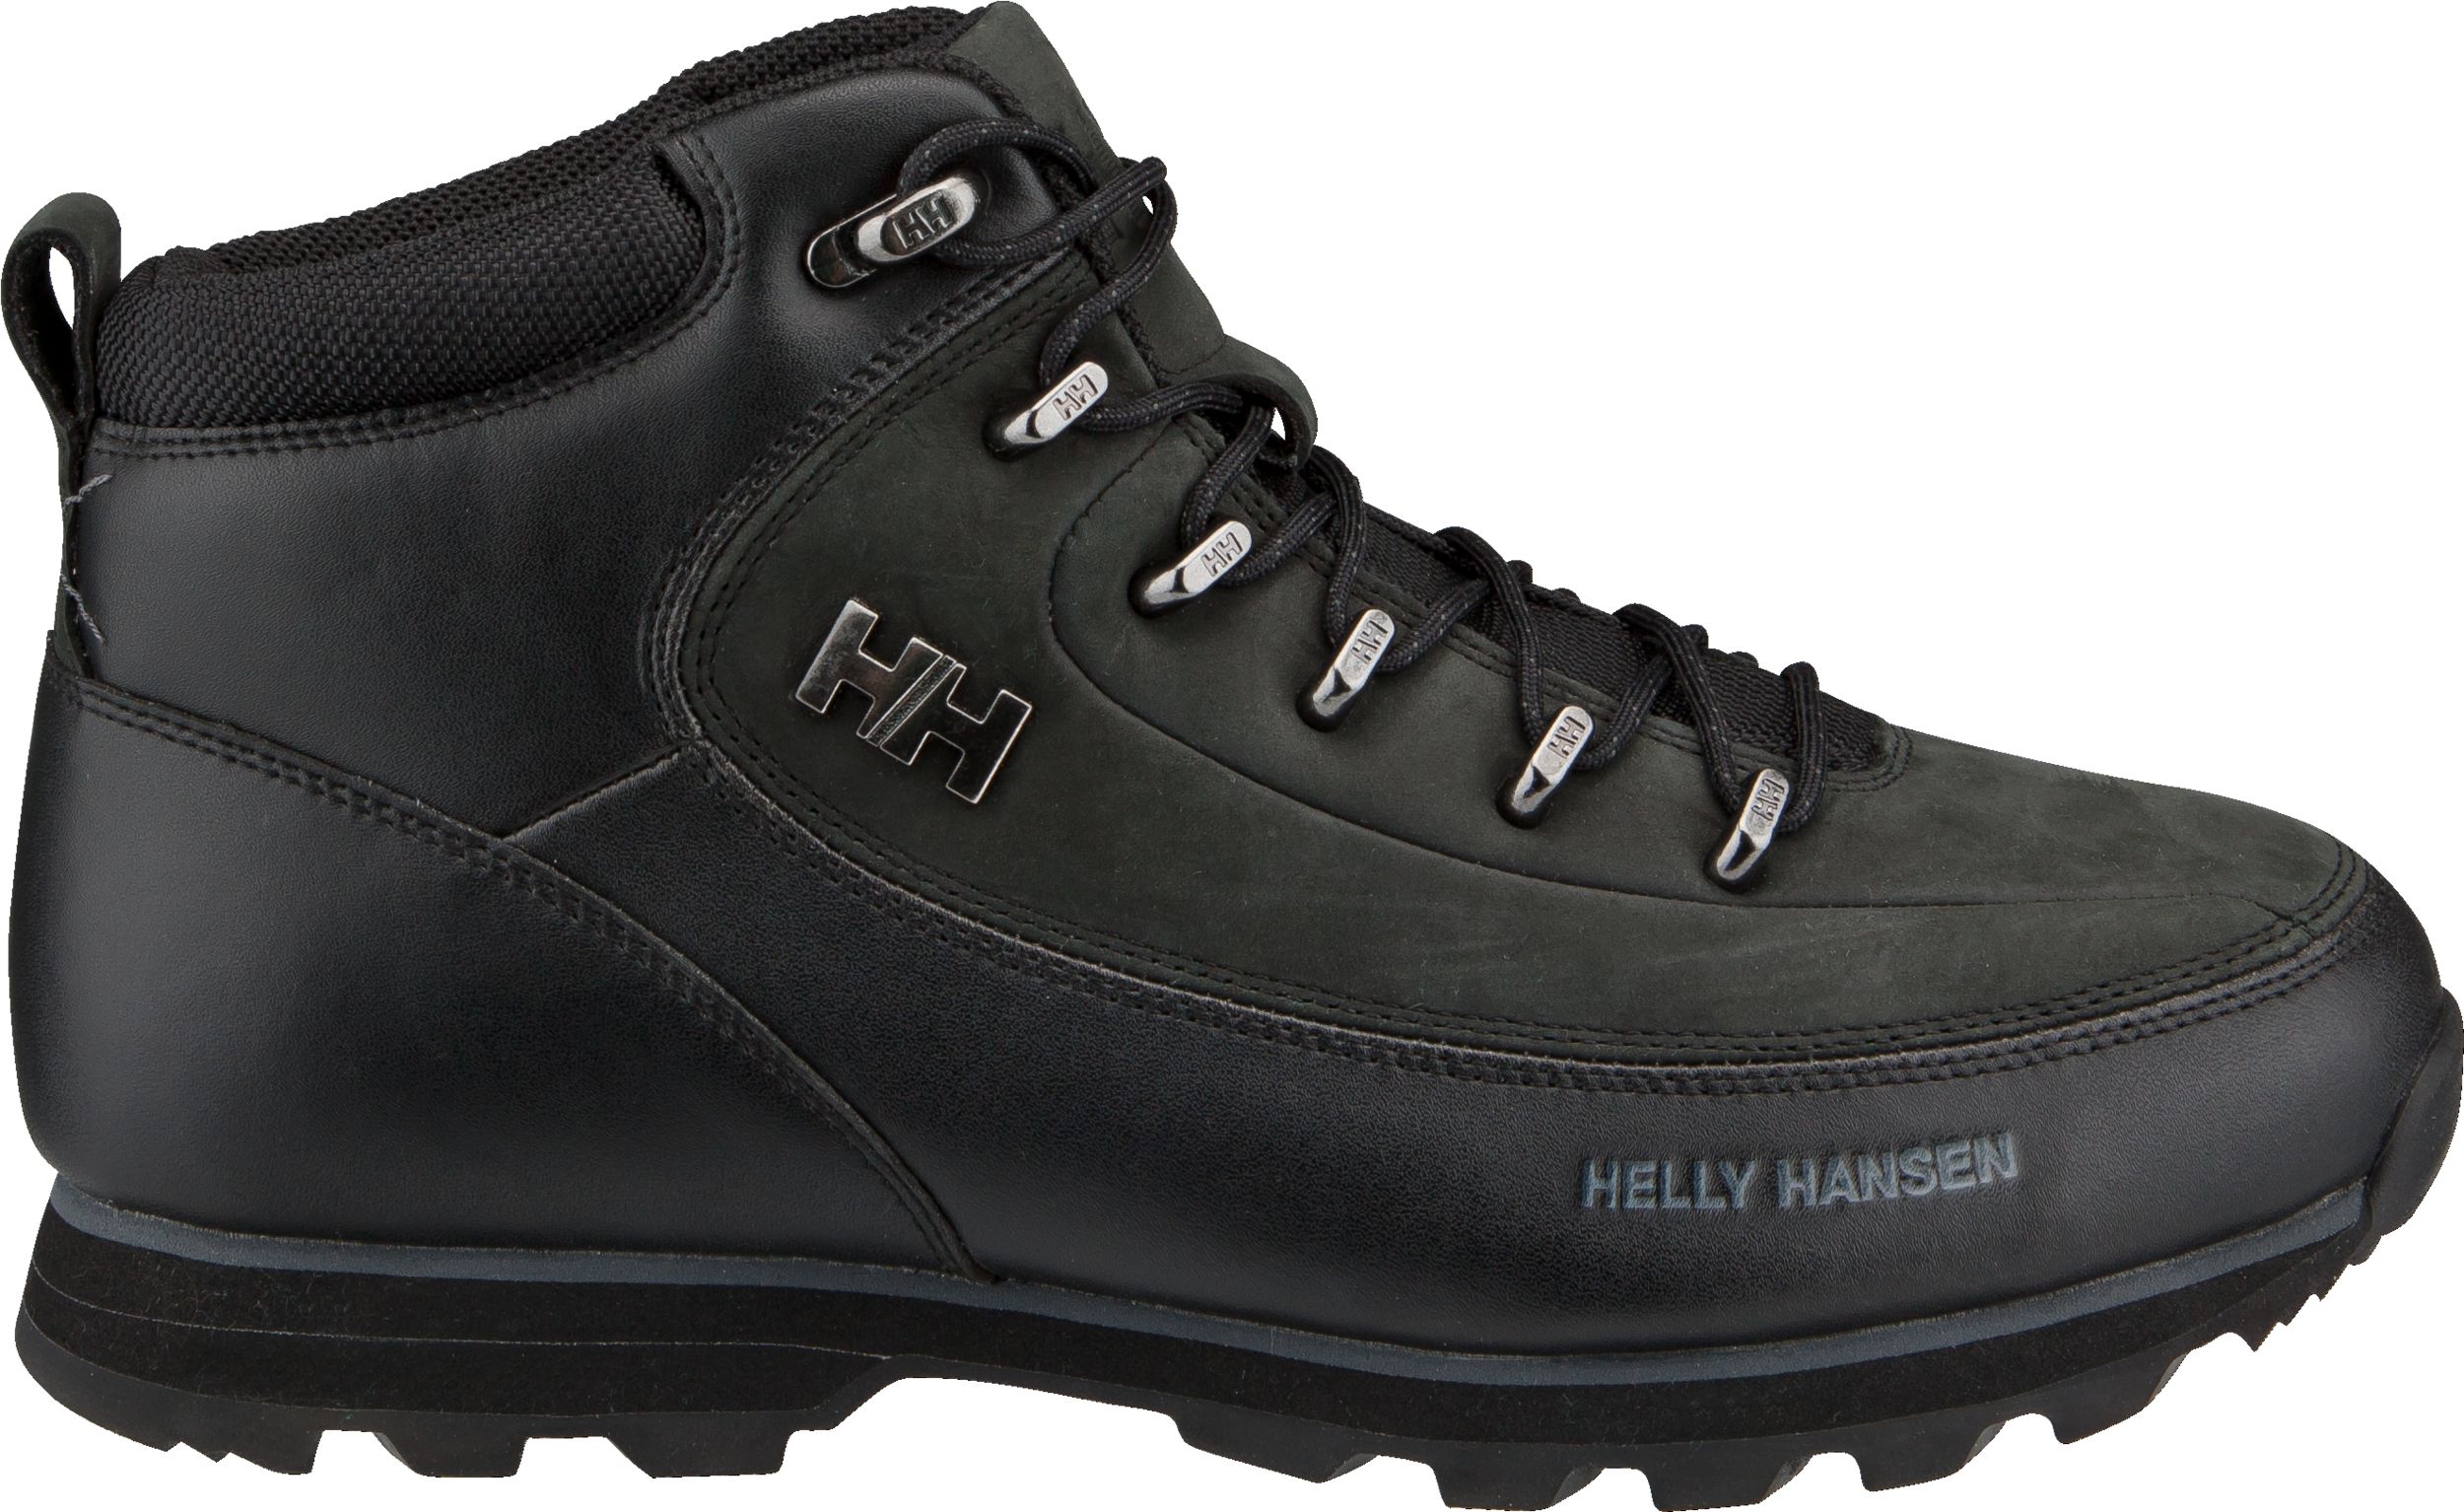 Image of Helly Hansen Men's The Forester Quick Dry Waterproof Winter Boots